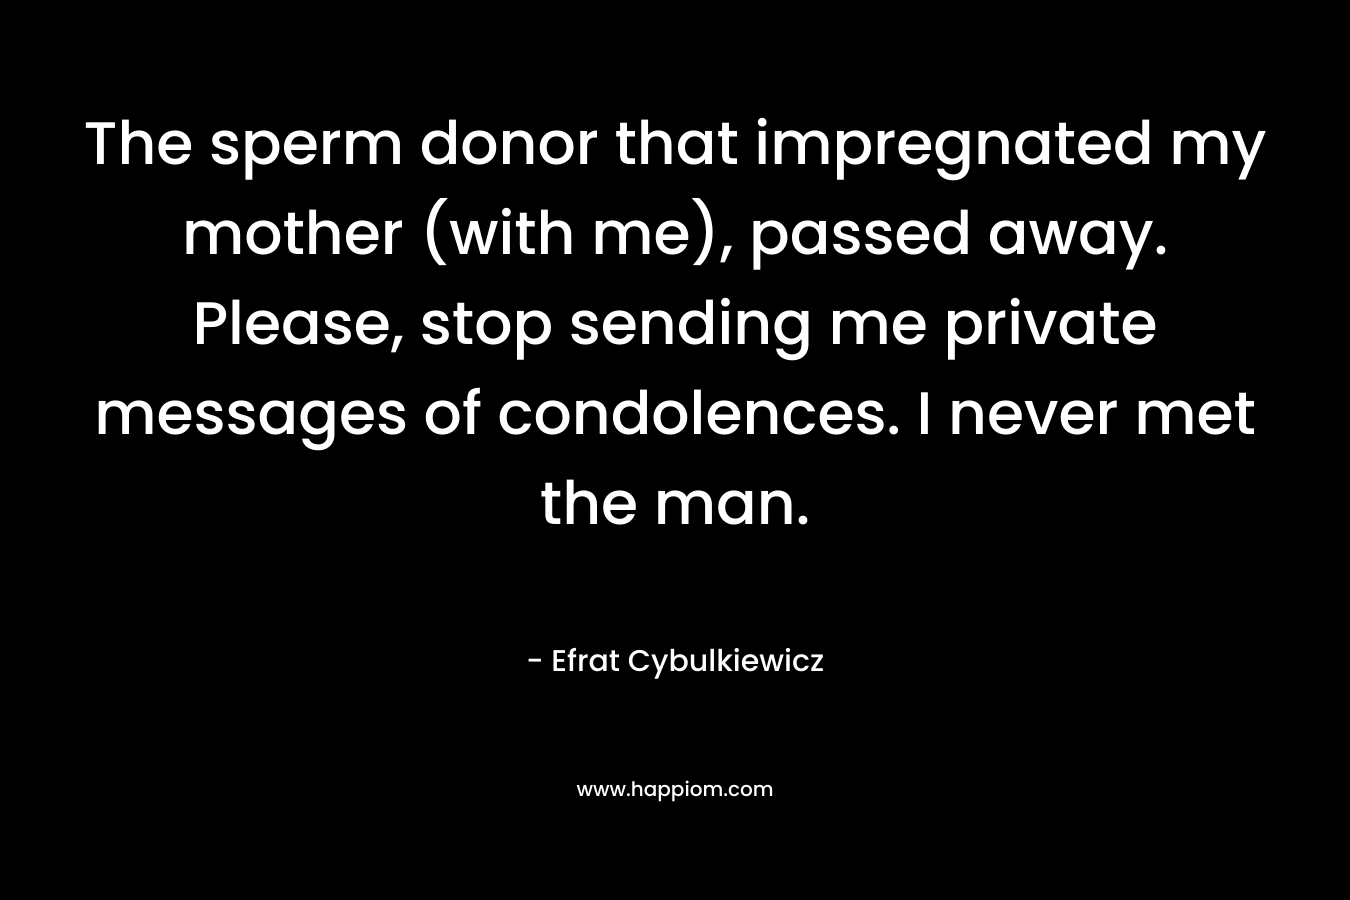 The sperm donor that impregnated my mother (with me), passed away. Please, stop sending me private messages of condolences. I never met the man. – Efrat Cybulkiewicz